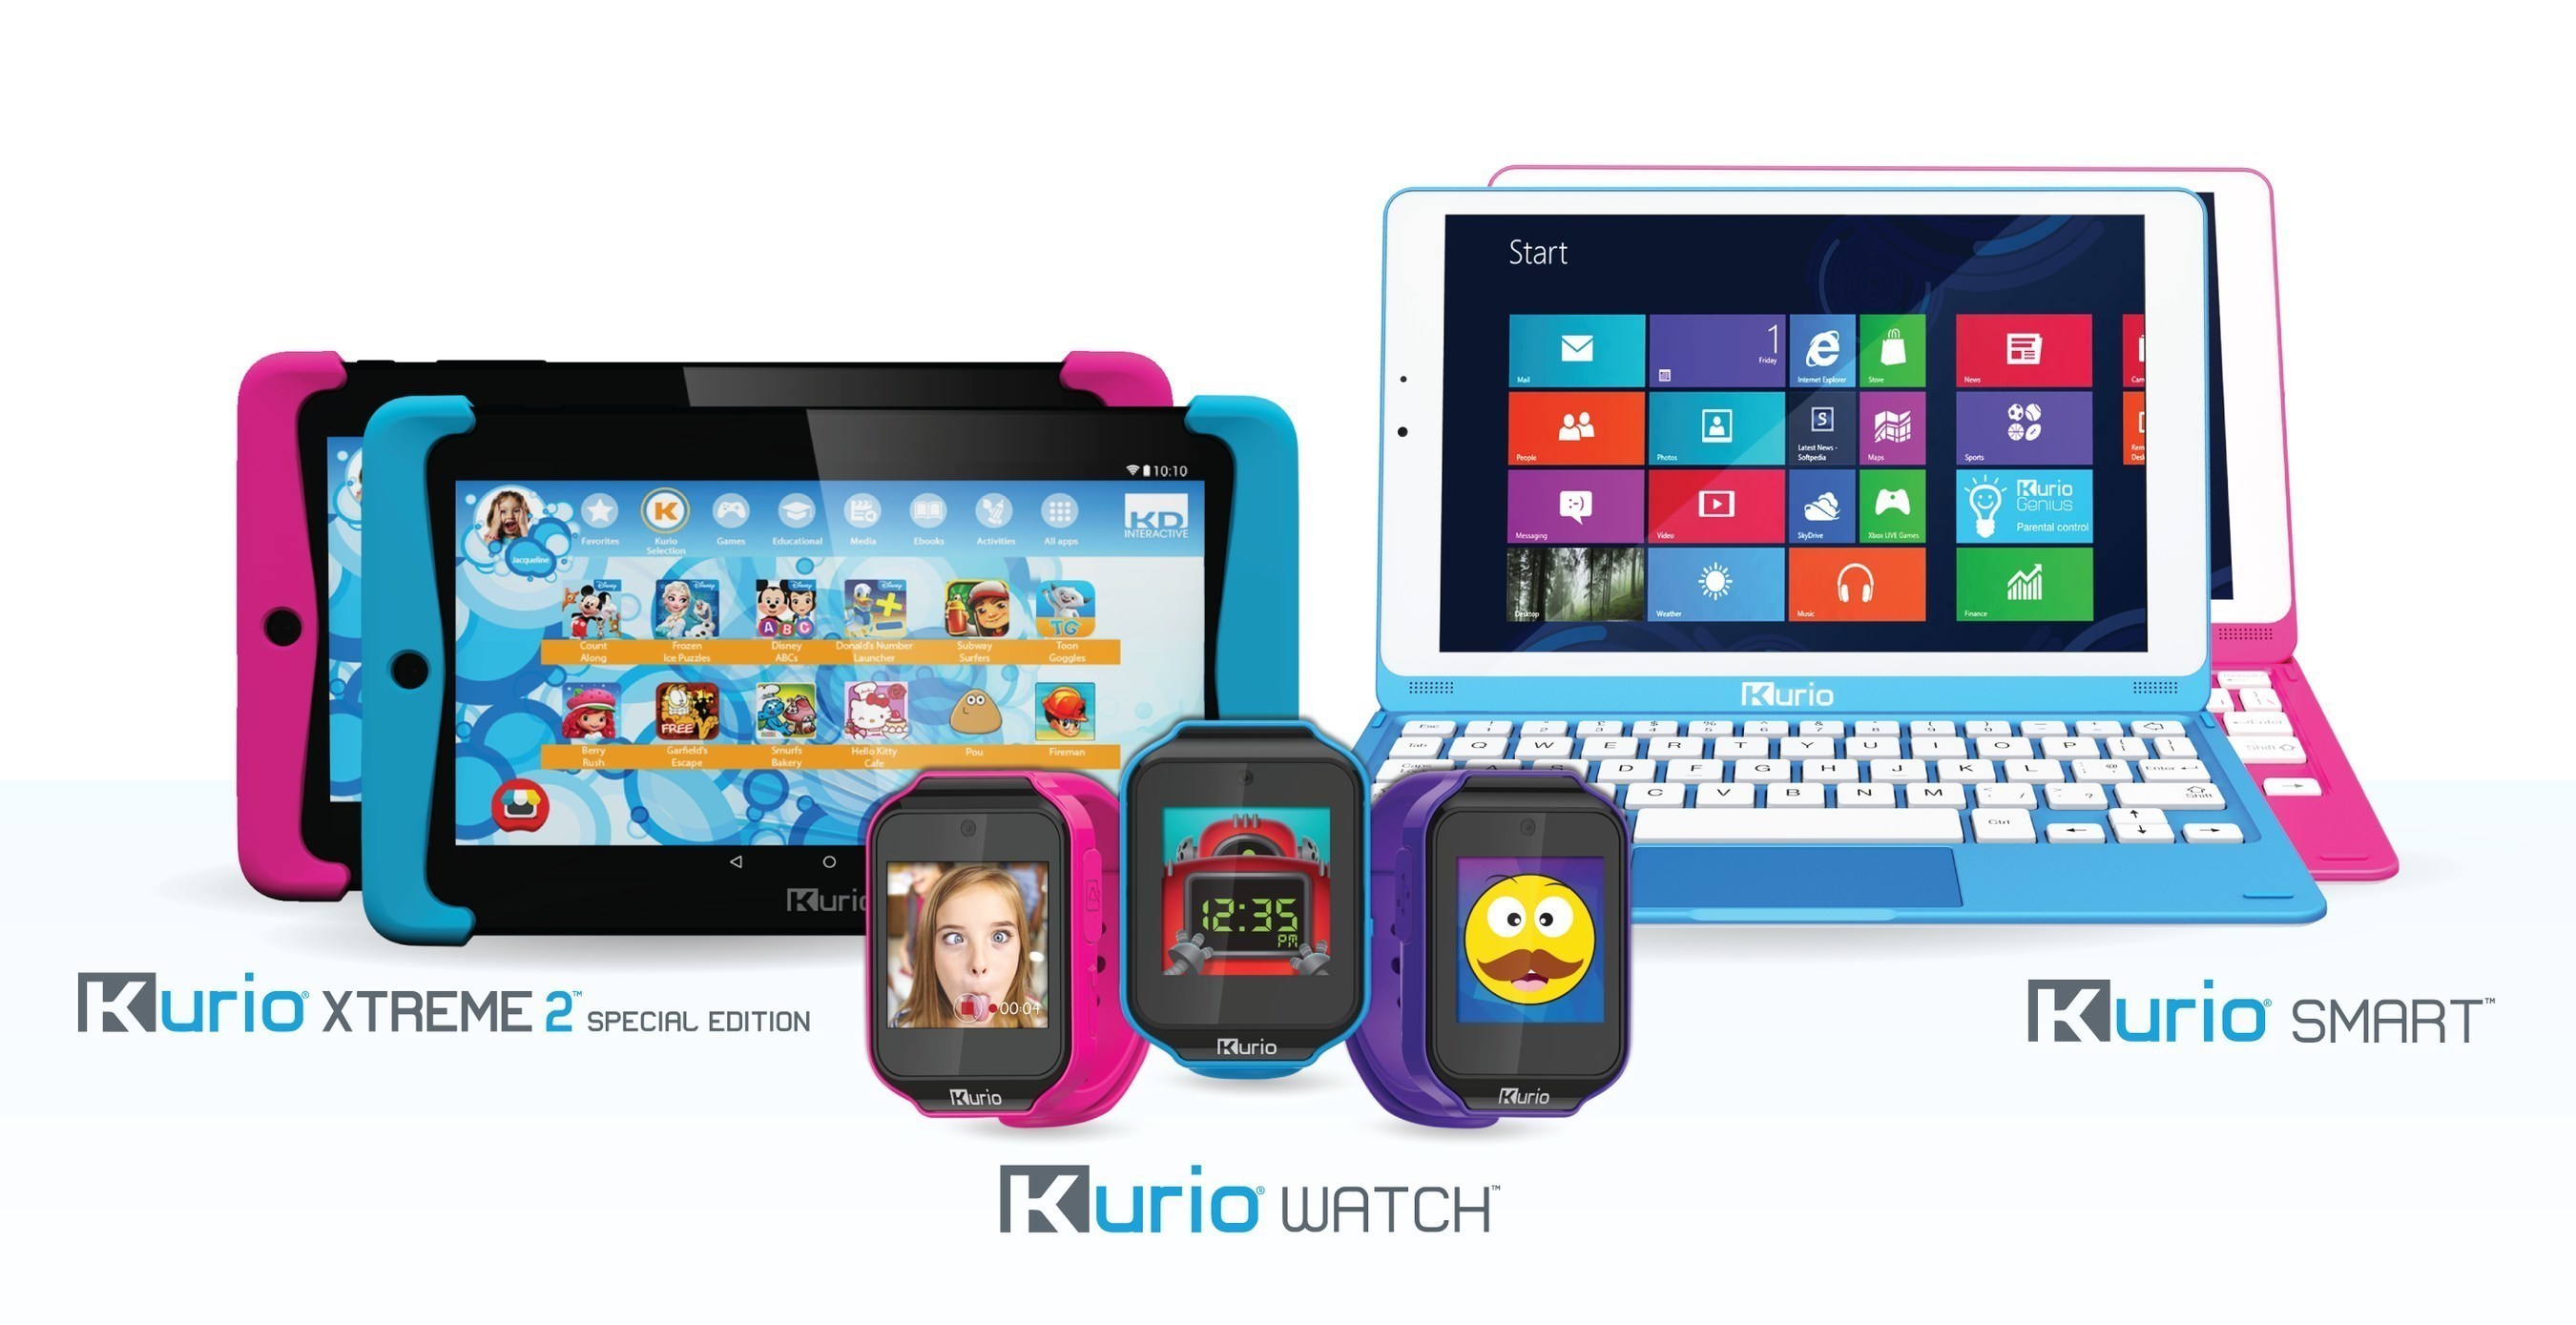 Kurio offers a range of innovative, fun and safe tech products for every gadget-obsessed kid this holiday season. (L to R) Kurio Xtreme 2 Special Edition Tablet, Kurio Watch and Kurio Smart(TM) Windows Laptop Tablet.